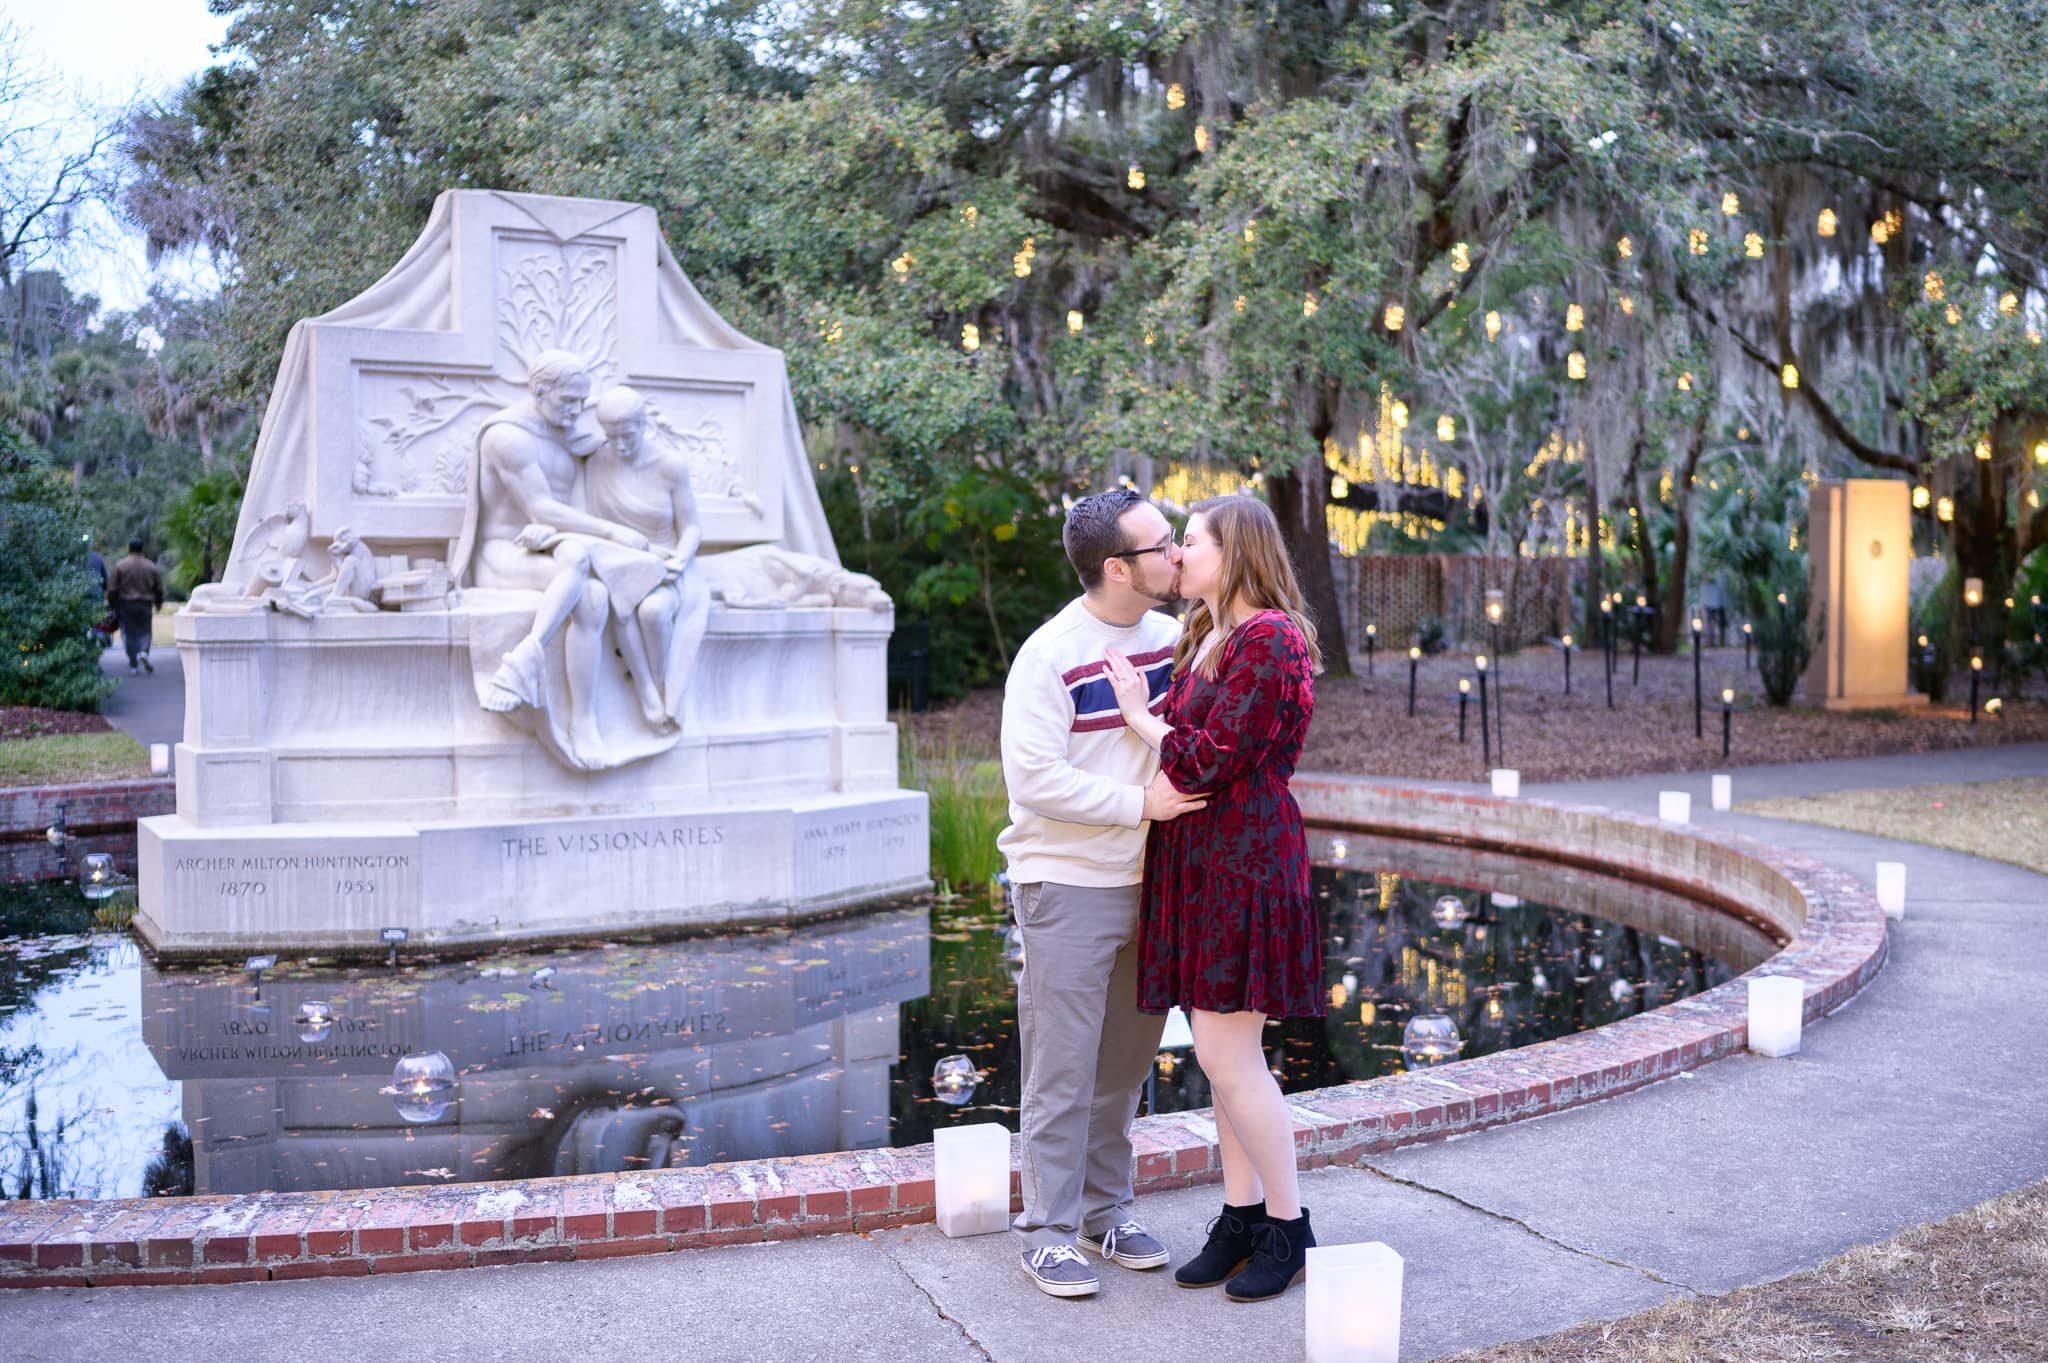 Kiss in front of the Visionaries - Brookgreen Gardens